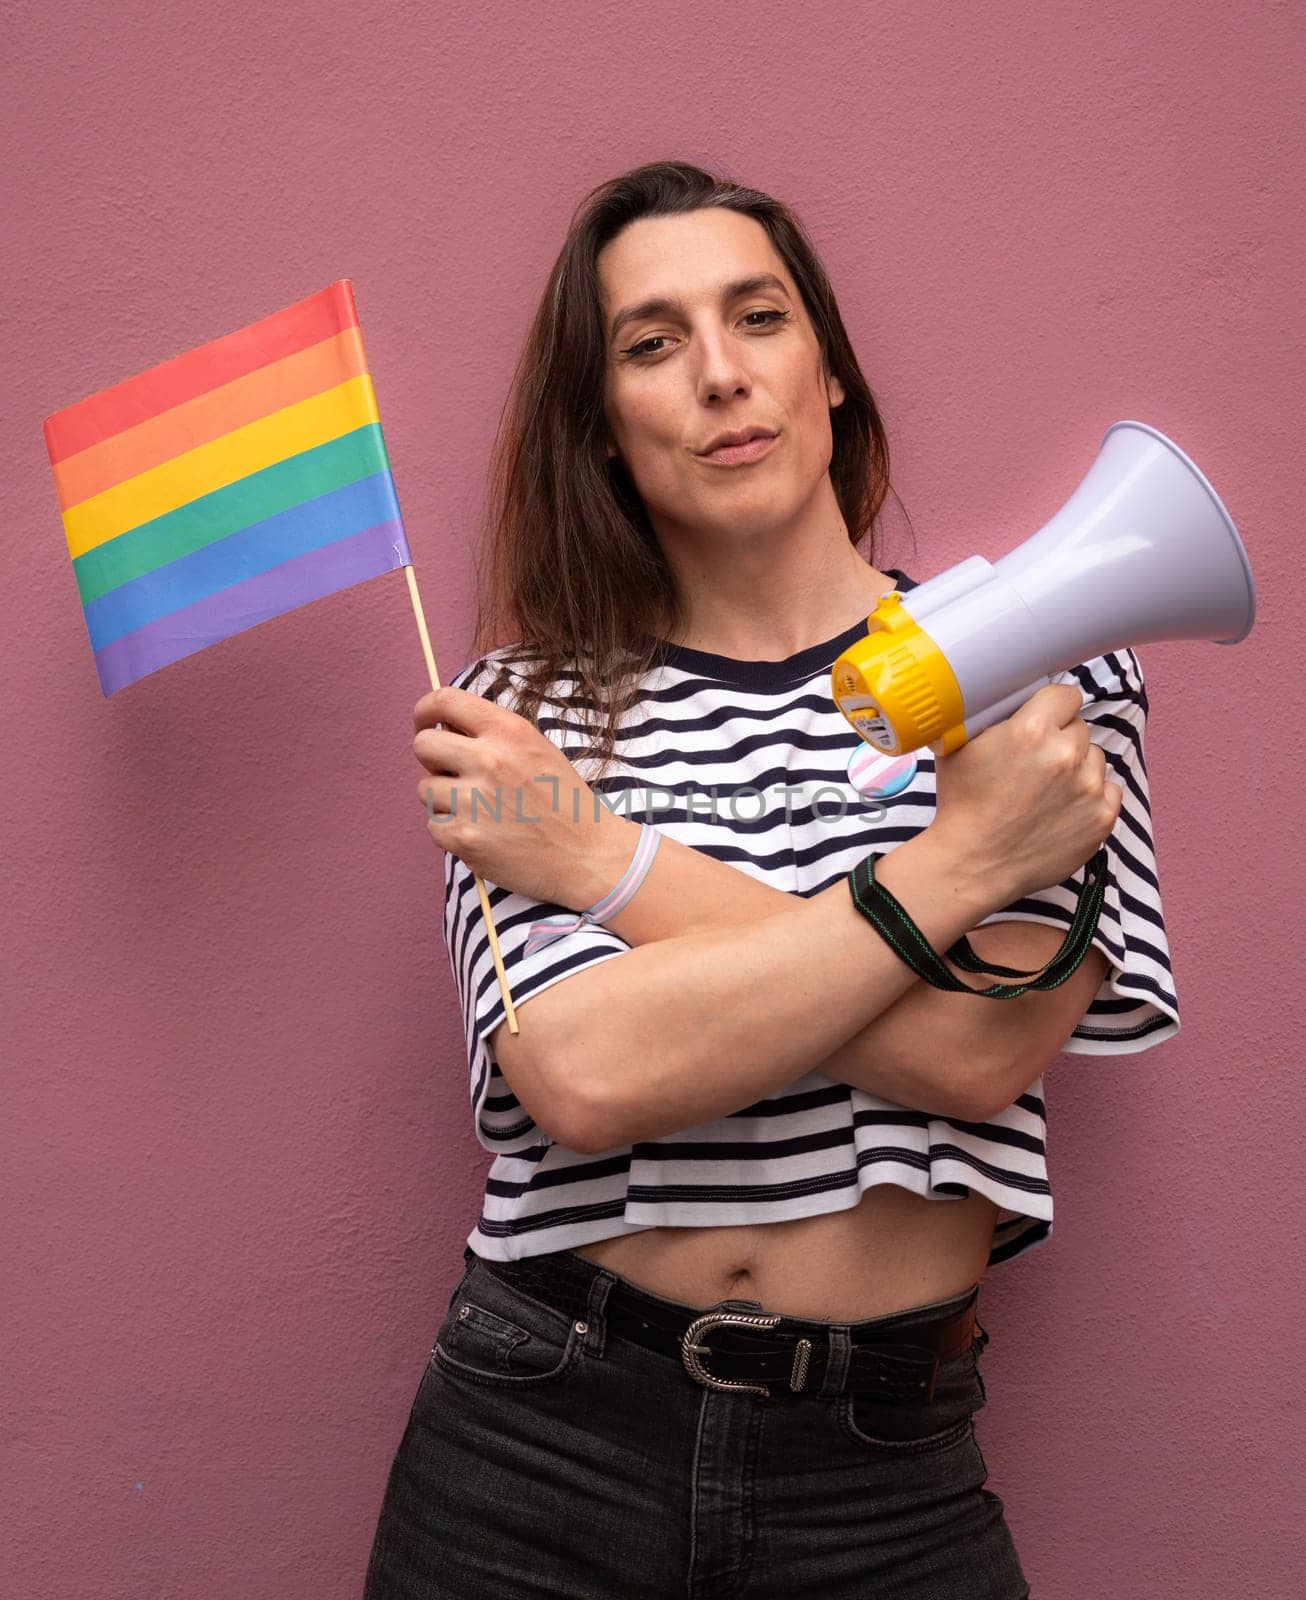 Transsexual woman looking at camera and holding a rainbow flag and a megaphone to support LGBTQ community as activist.